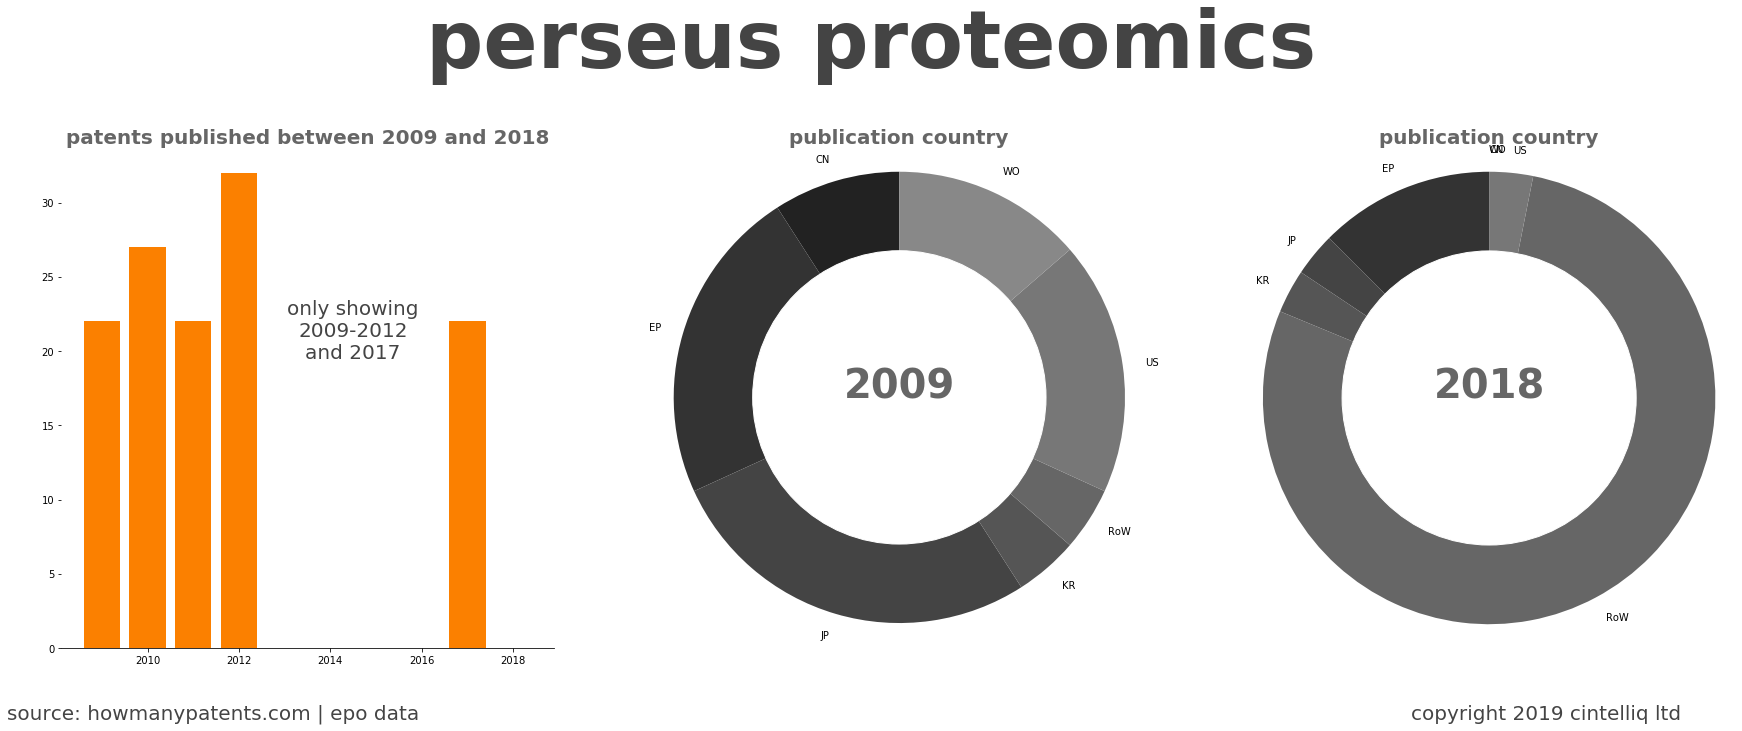 summary of patents for Perseus Proteomics